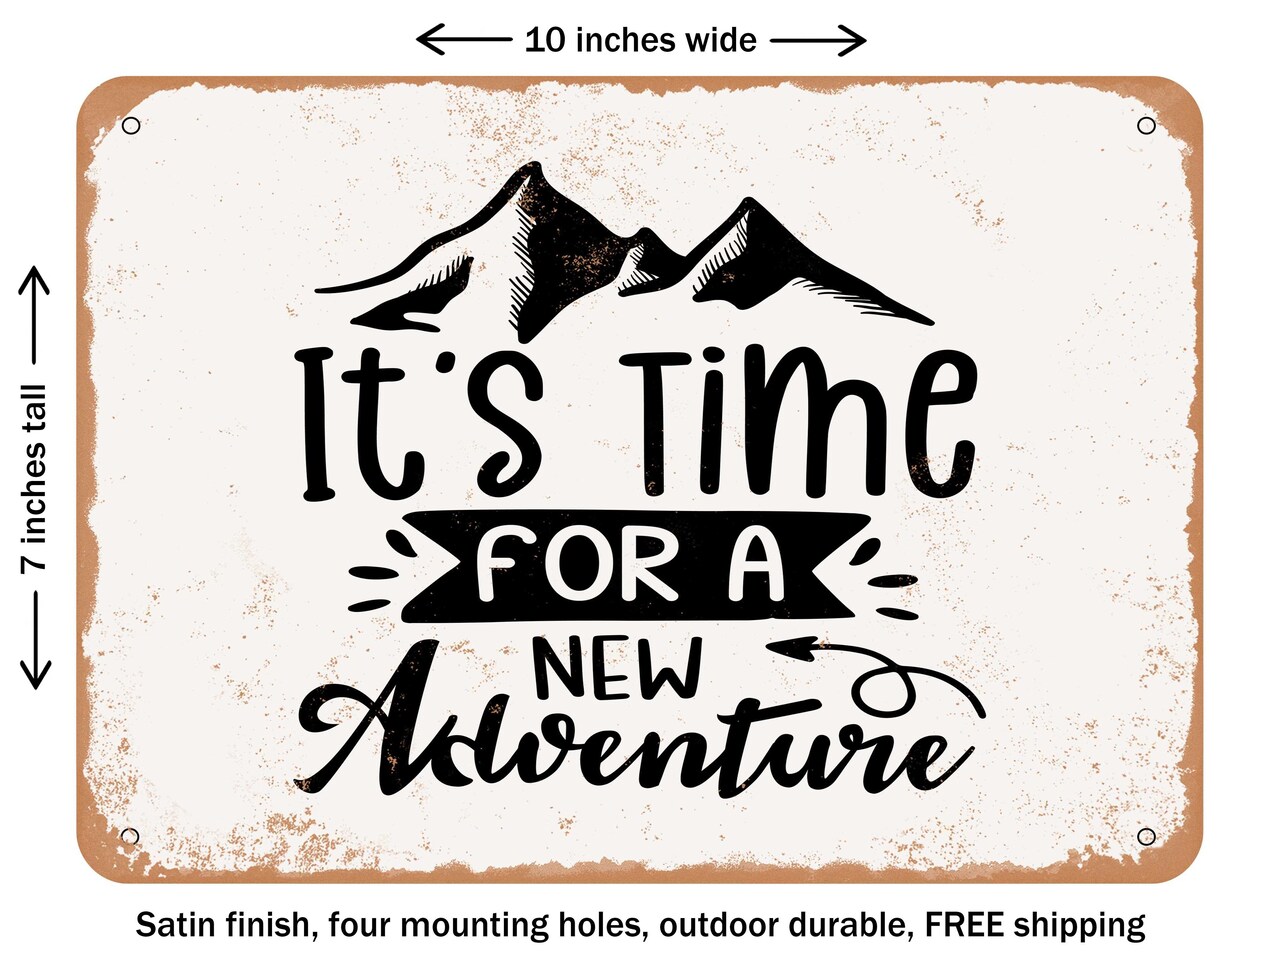 DECORATIVE METAL SIGN - Its Time For a New Adventure - Vintage Rusty Look